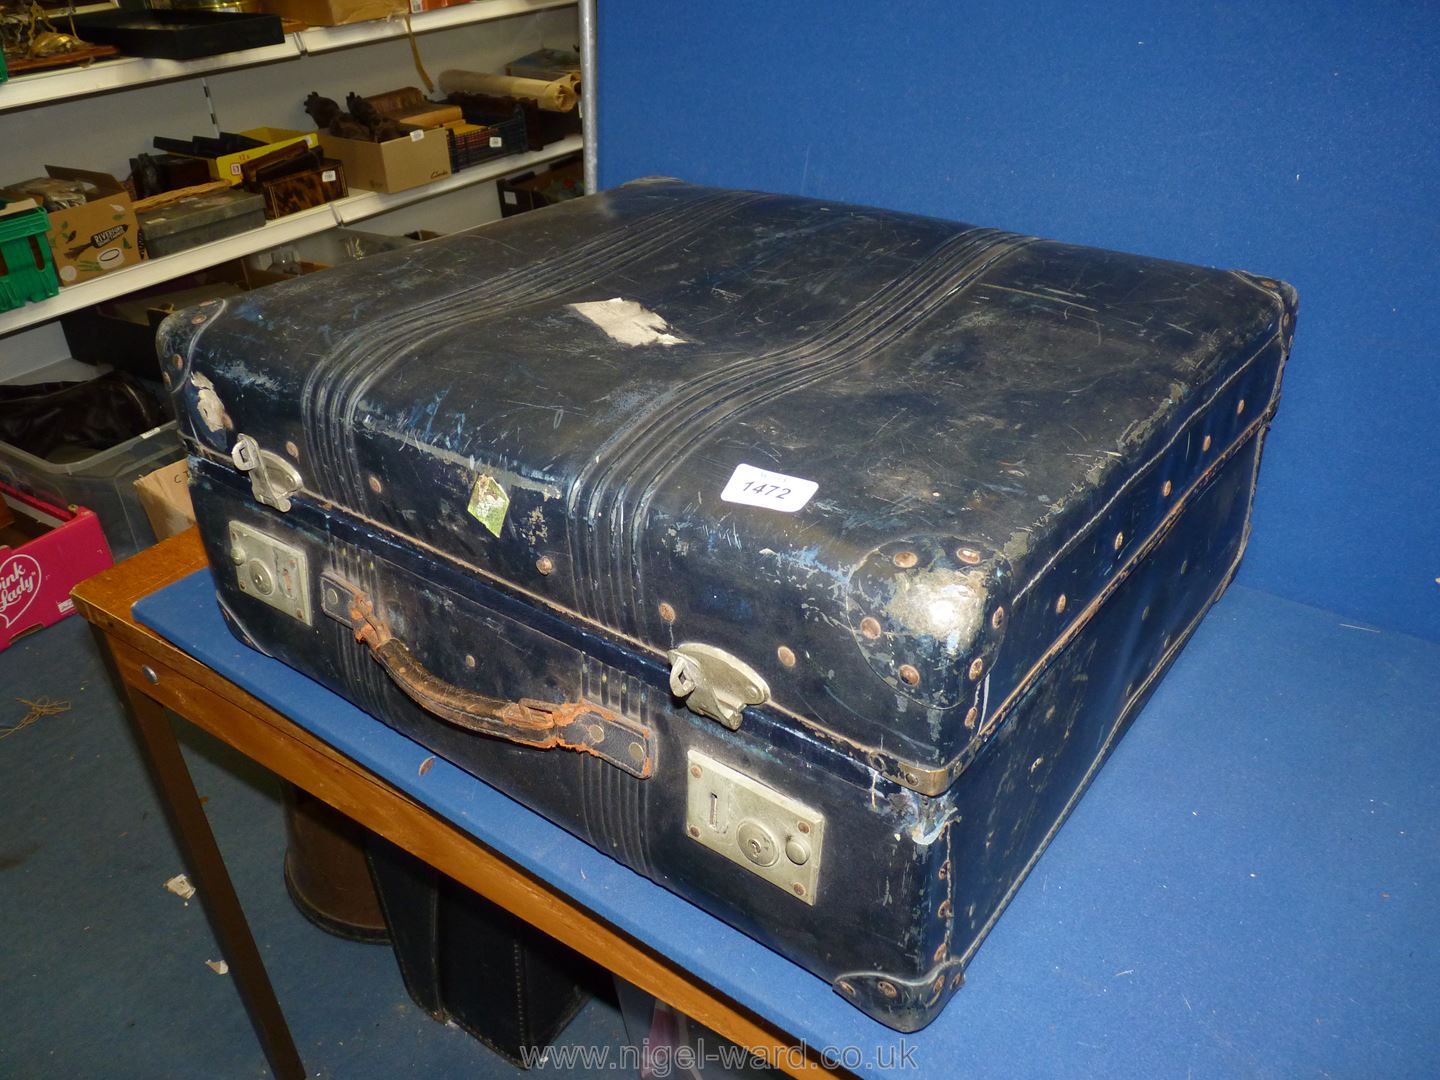 A large black Travel Case by "Rev-Robe, England" with fabric lining and met al rods to interior,